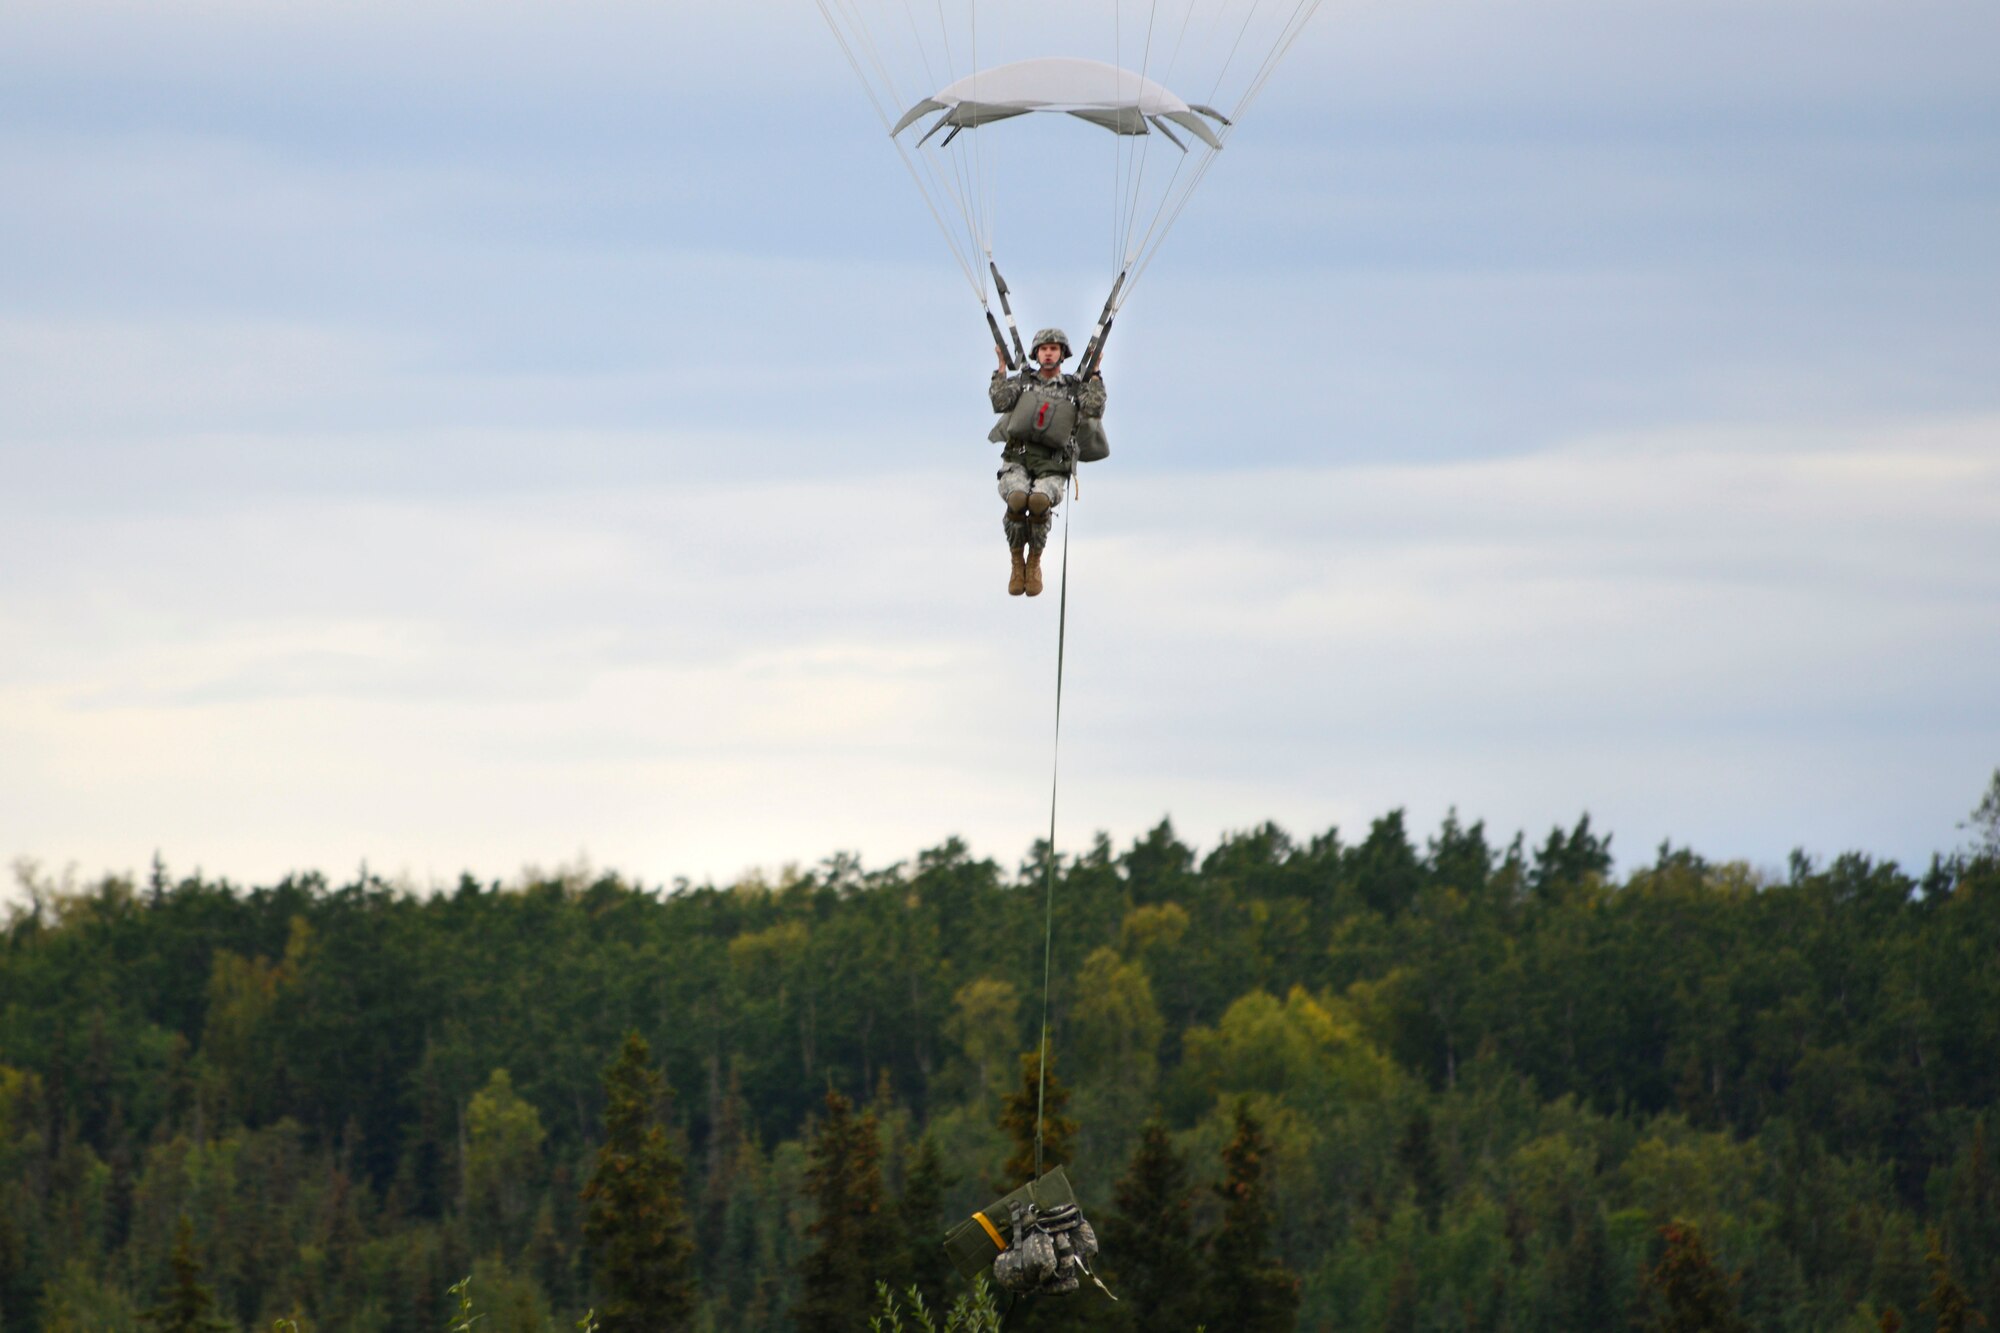 A paratrooper assigned to the 4th Infantry Brigade Combat Team (Airborne), 25th Infantry Division, U.S. Army Alaska, prepares to land during a joint forcible entry exercise at Malemute Drop Zone on Joint Base Elmendorf-Richardson, Alaska, Aug. 23, 2016, as part of Exercise Spartan Agoge. Spartan Agoge is a brigade-level field training exercise that began Aug. 15, and focuses on an array of combat-related tasks from squad live-fire exercises to helicopter air insertion and airborne assault training. (U.S. Air Force photo by Airman 1st Class Valerie Monroy)